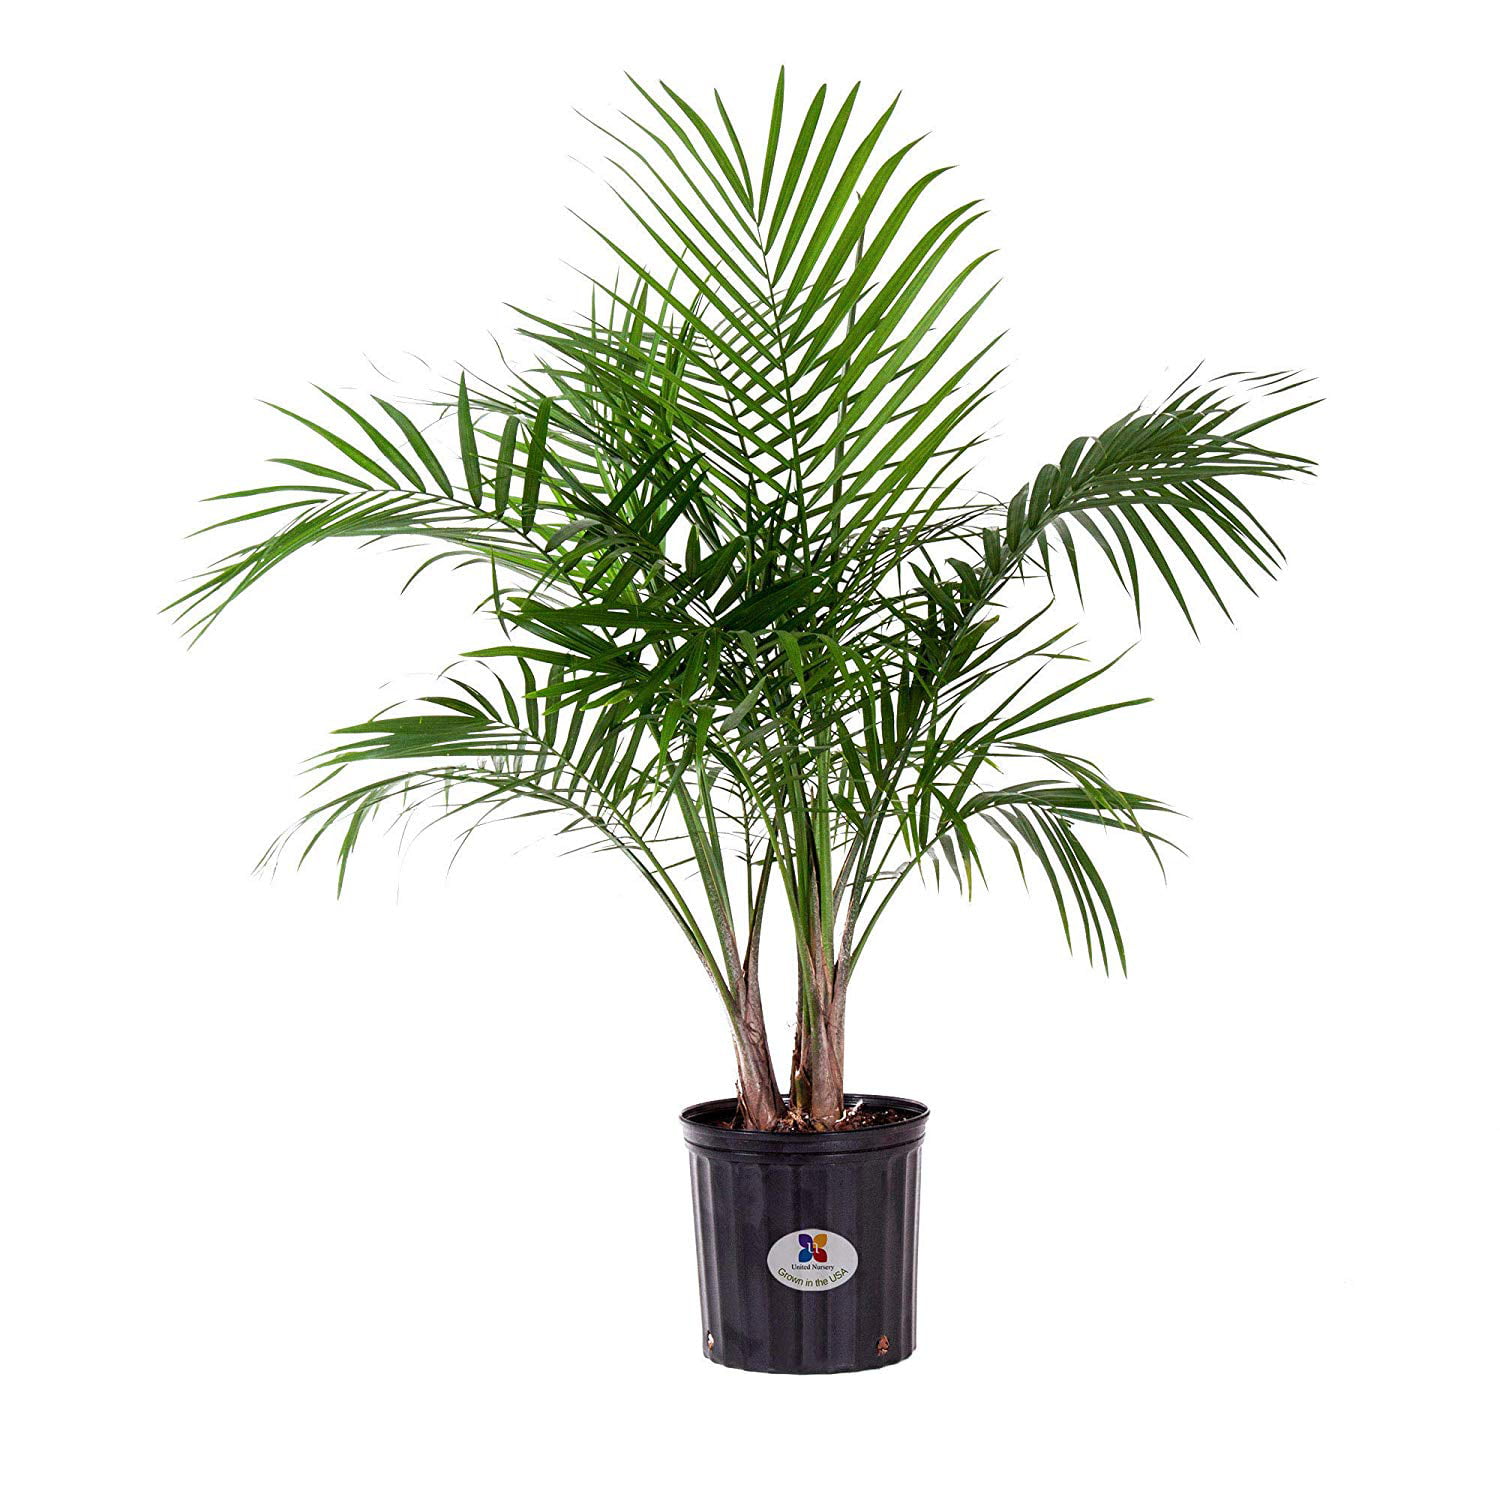 United Nursery Majesty Palm Tree Live Indoor Outdoor Plant in 9.25 Inch